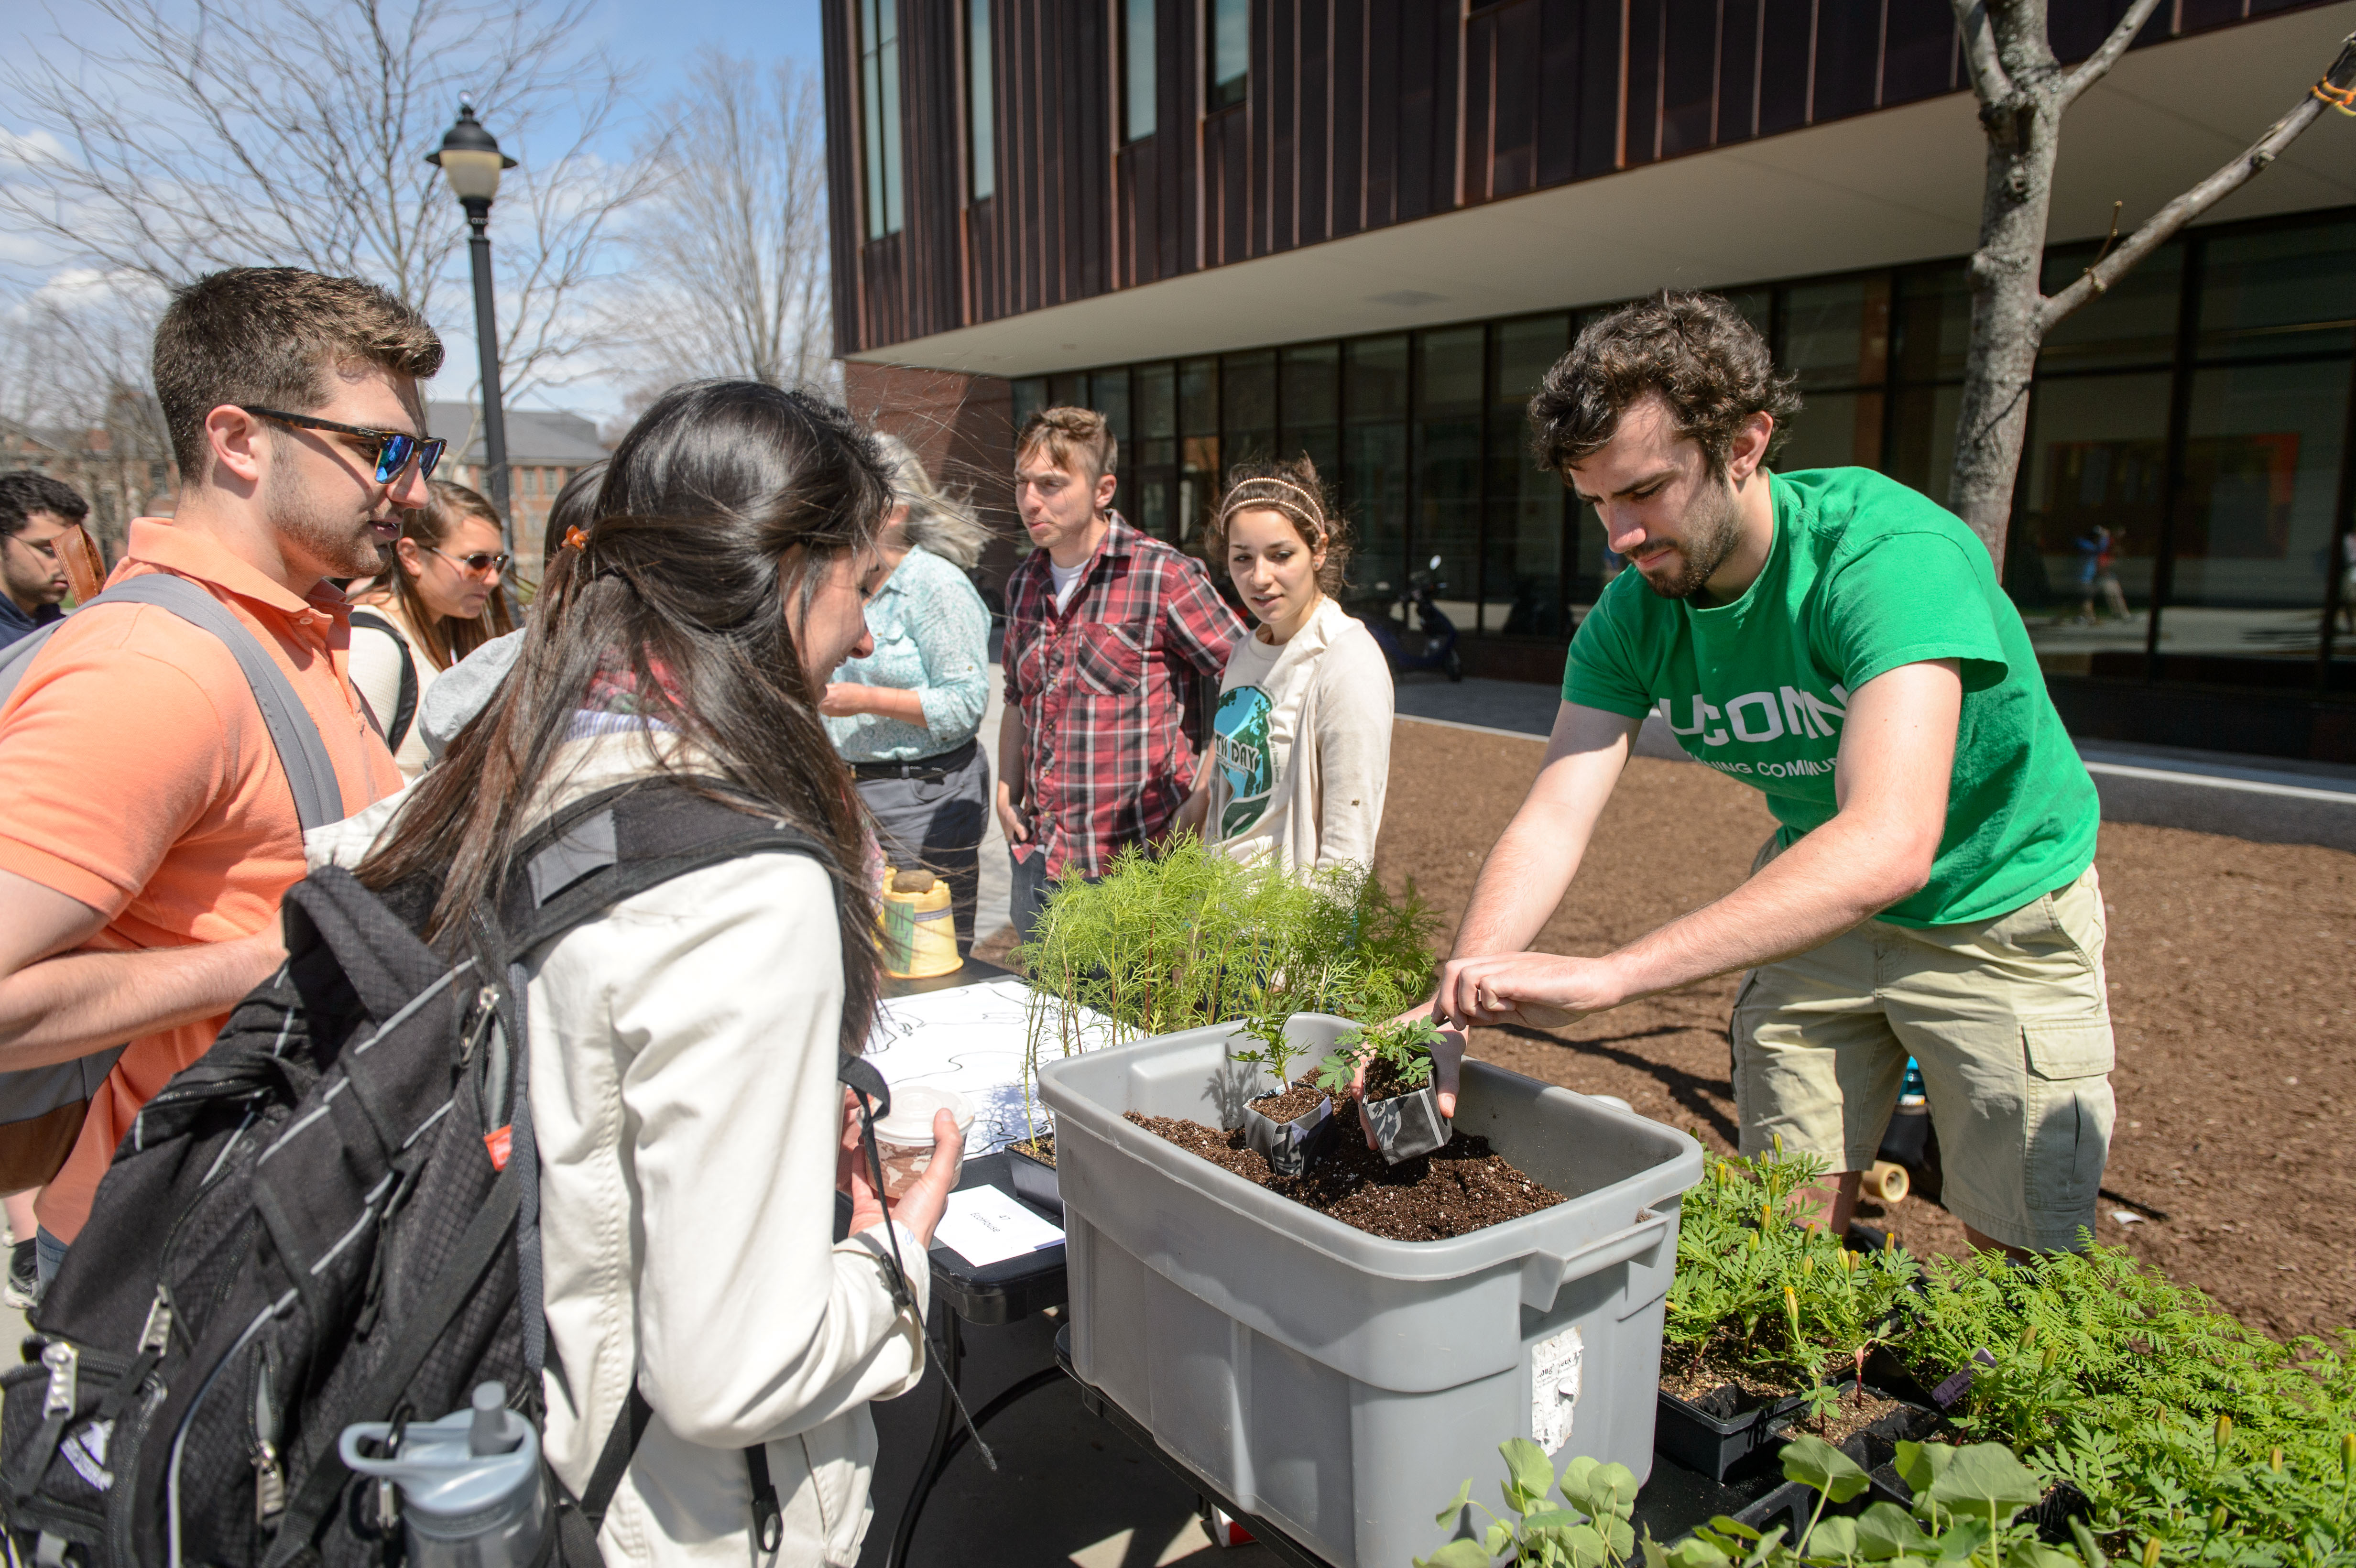 Students from EcoHouse and Spring Valley Farm hand out potted plants during one of the university's recent Earth Day celebrations. (Peter Morenus/UConn Photo)